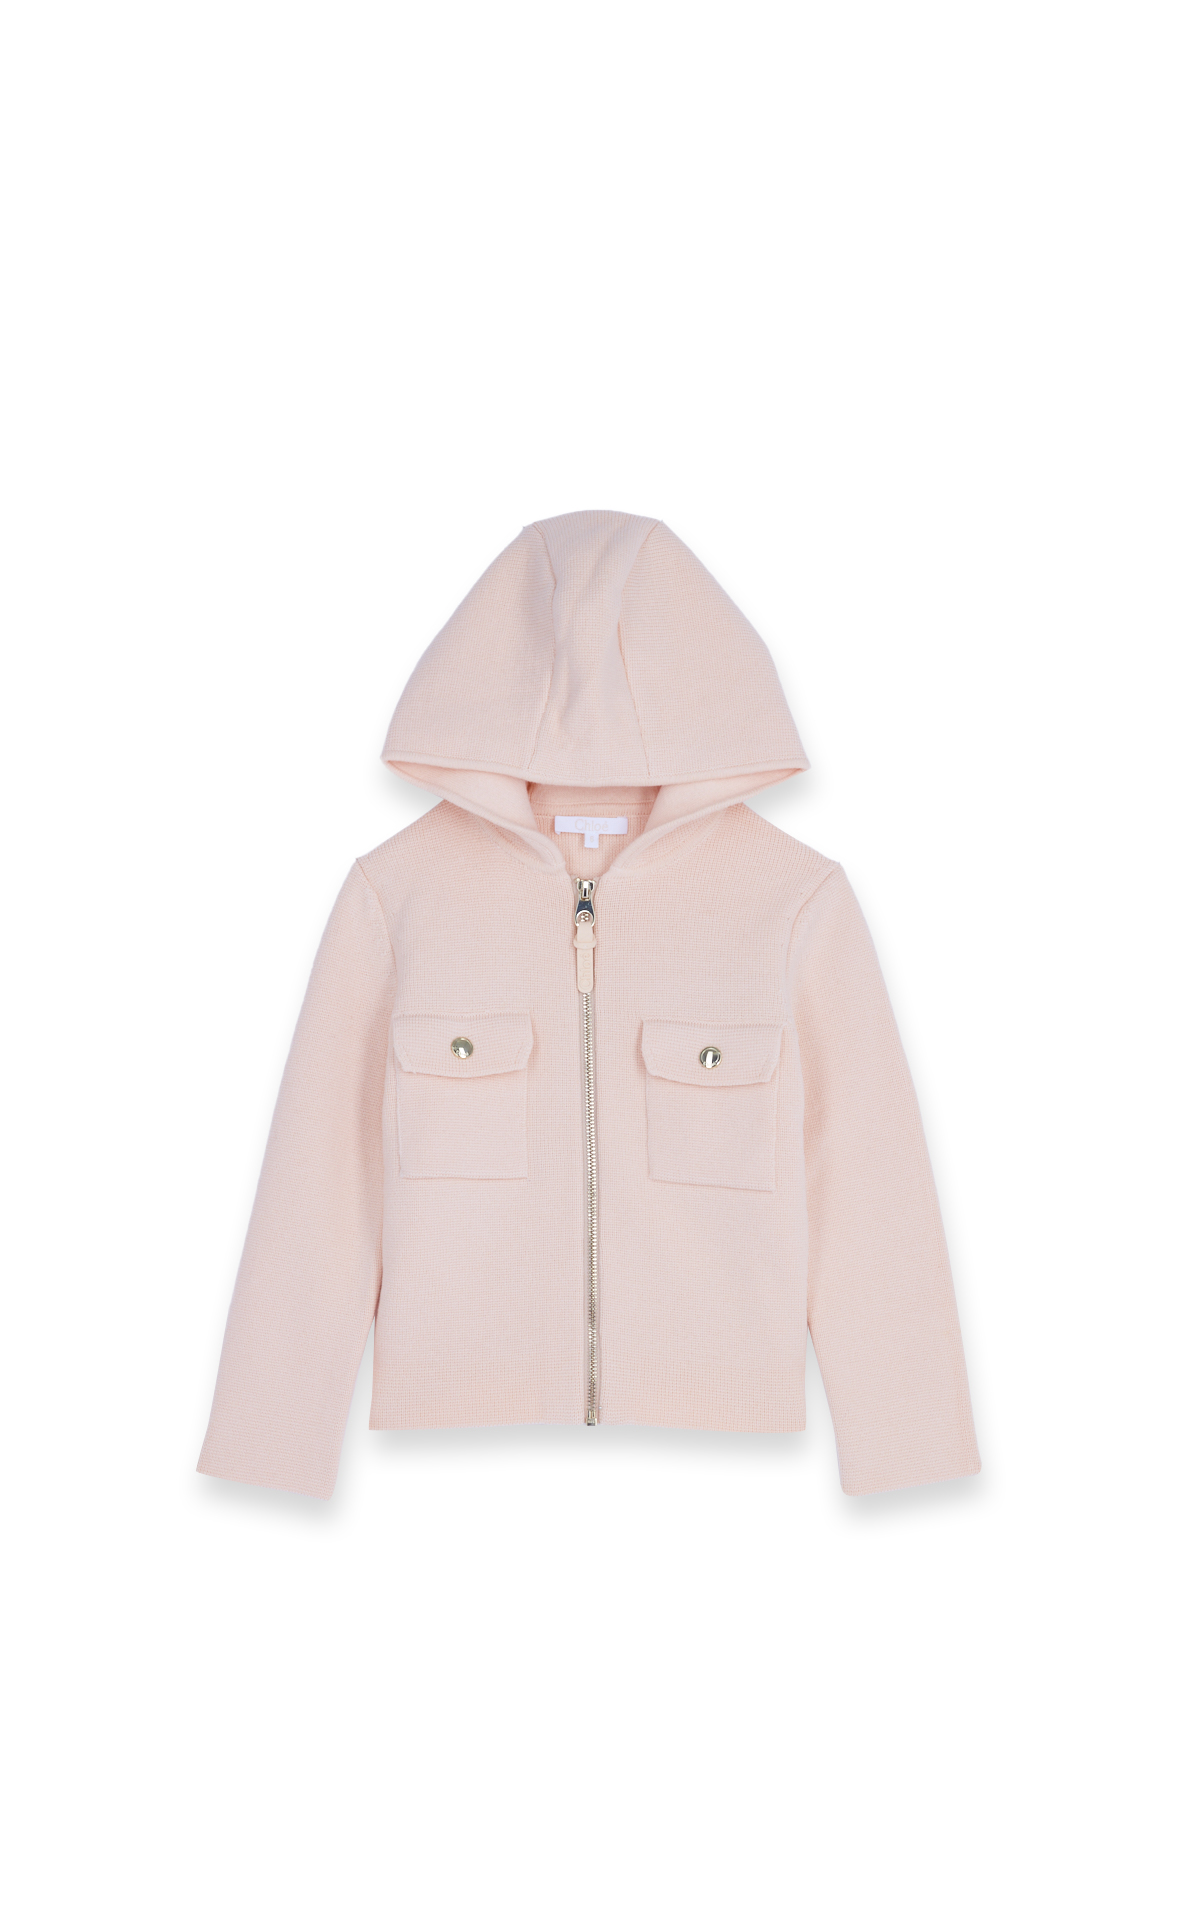 Chloé hooded cardigan with zipped pockets*